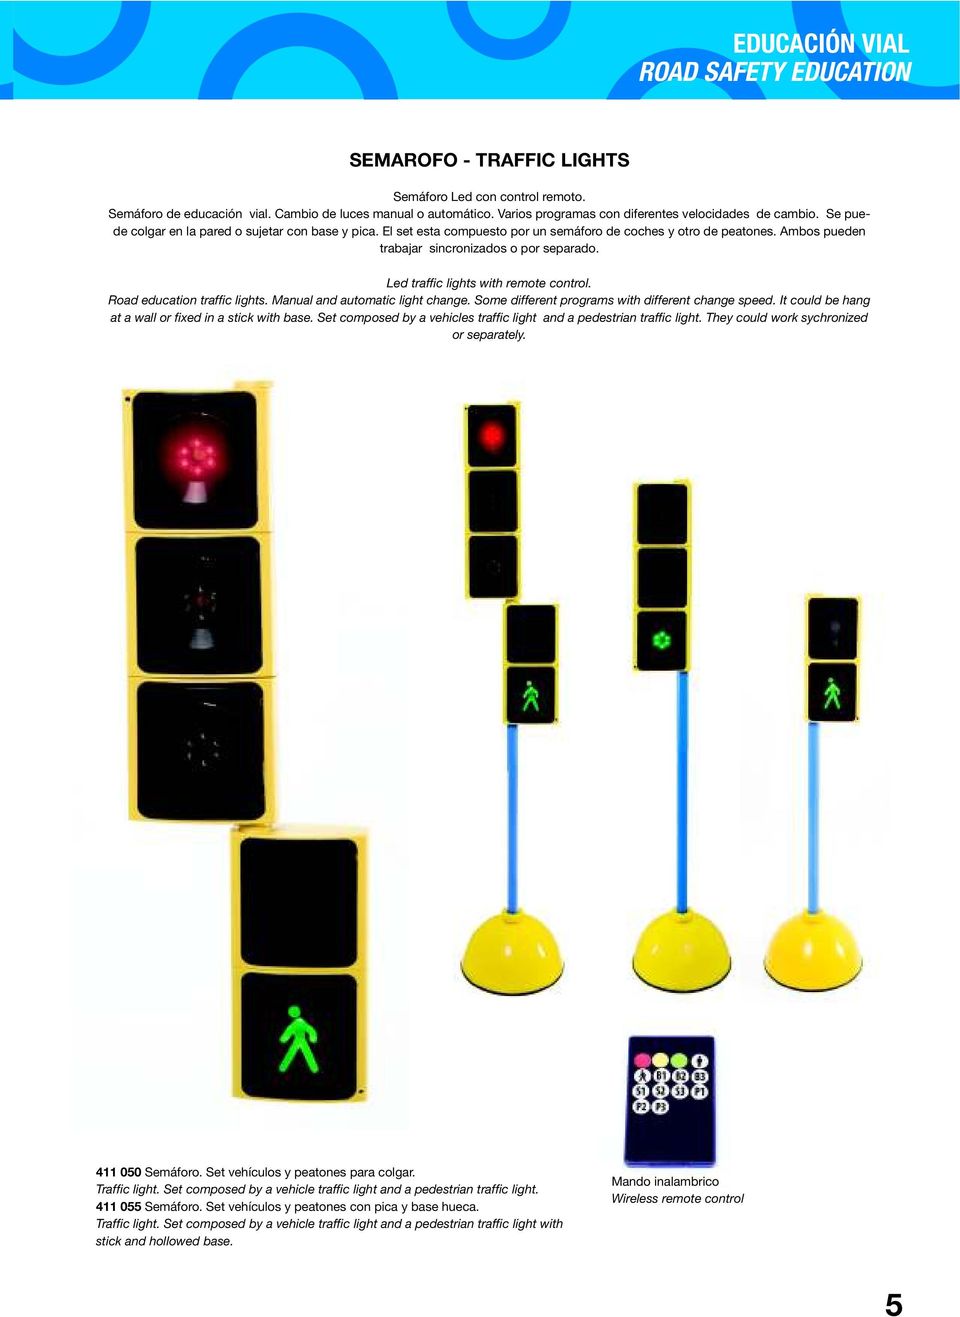 Led traffic lights with remote control. Road education traffic lights. Manual and automatic light change. Some different programs with different change speed.